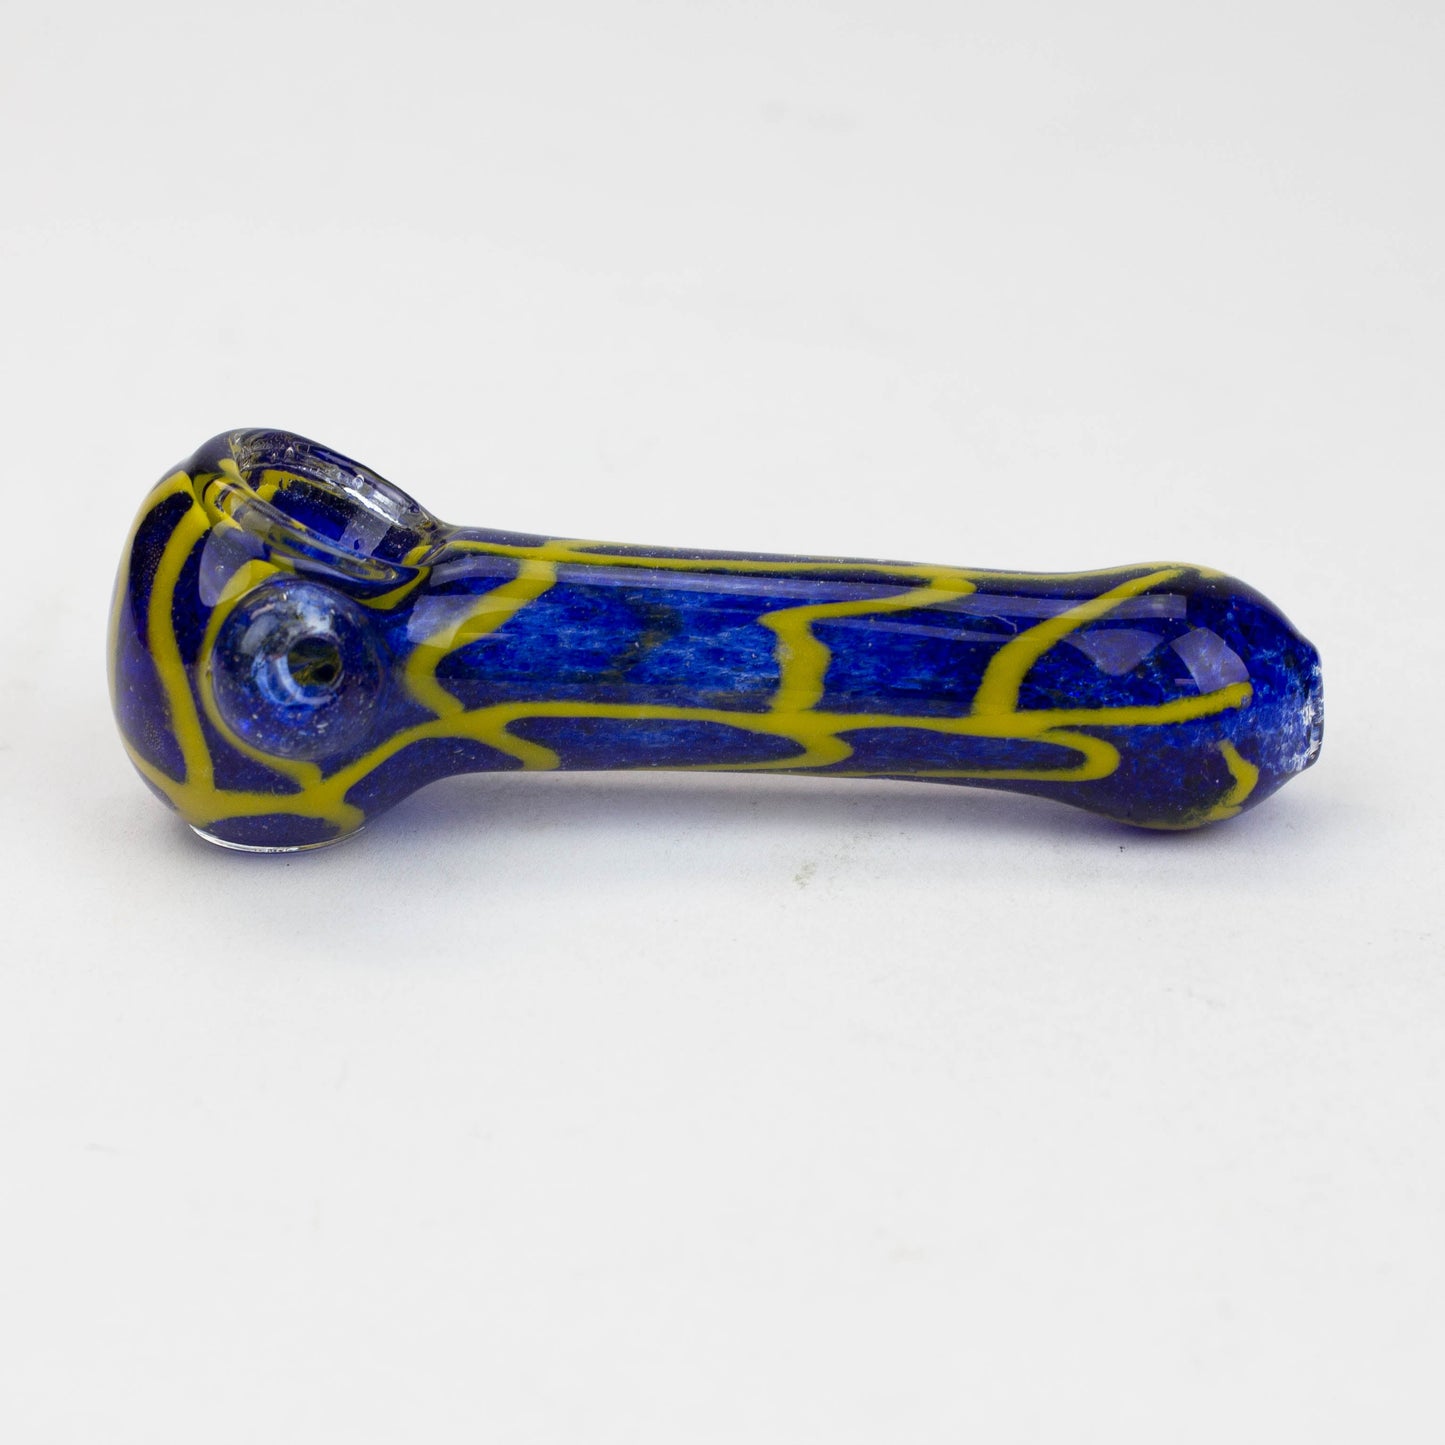 5" soft glass hand pipe [8983]_3